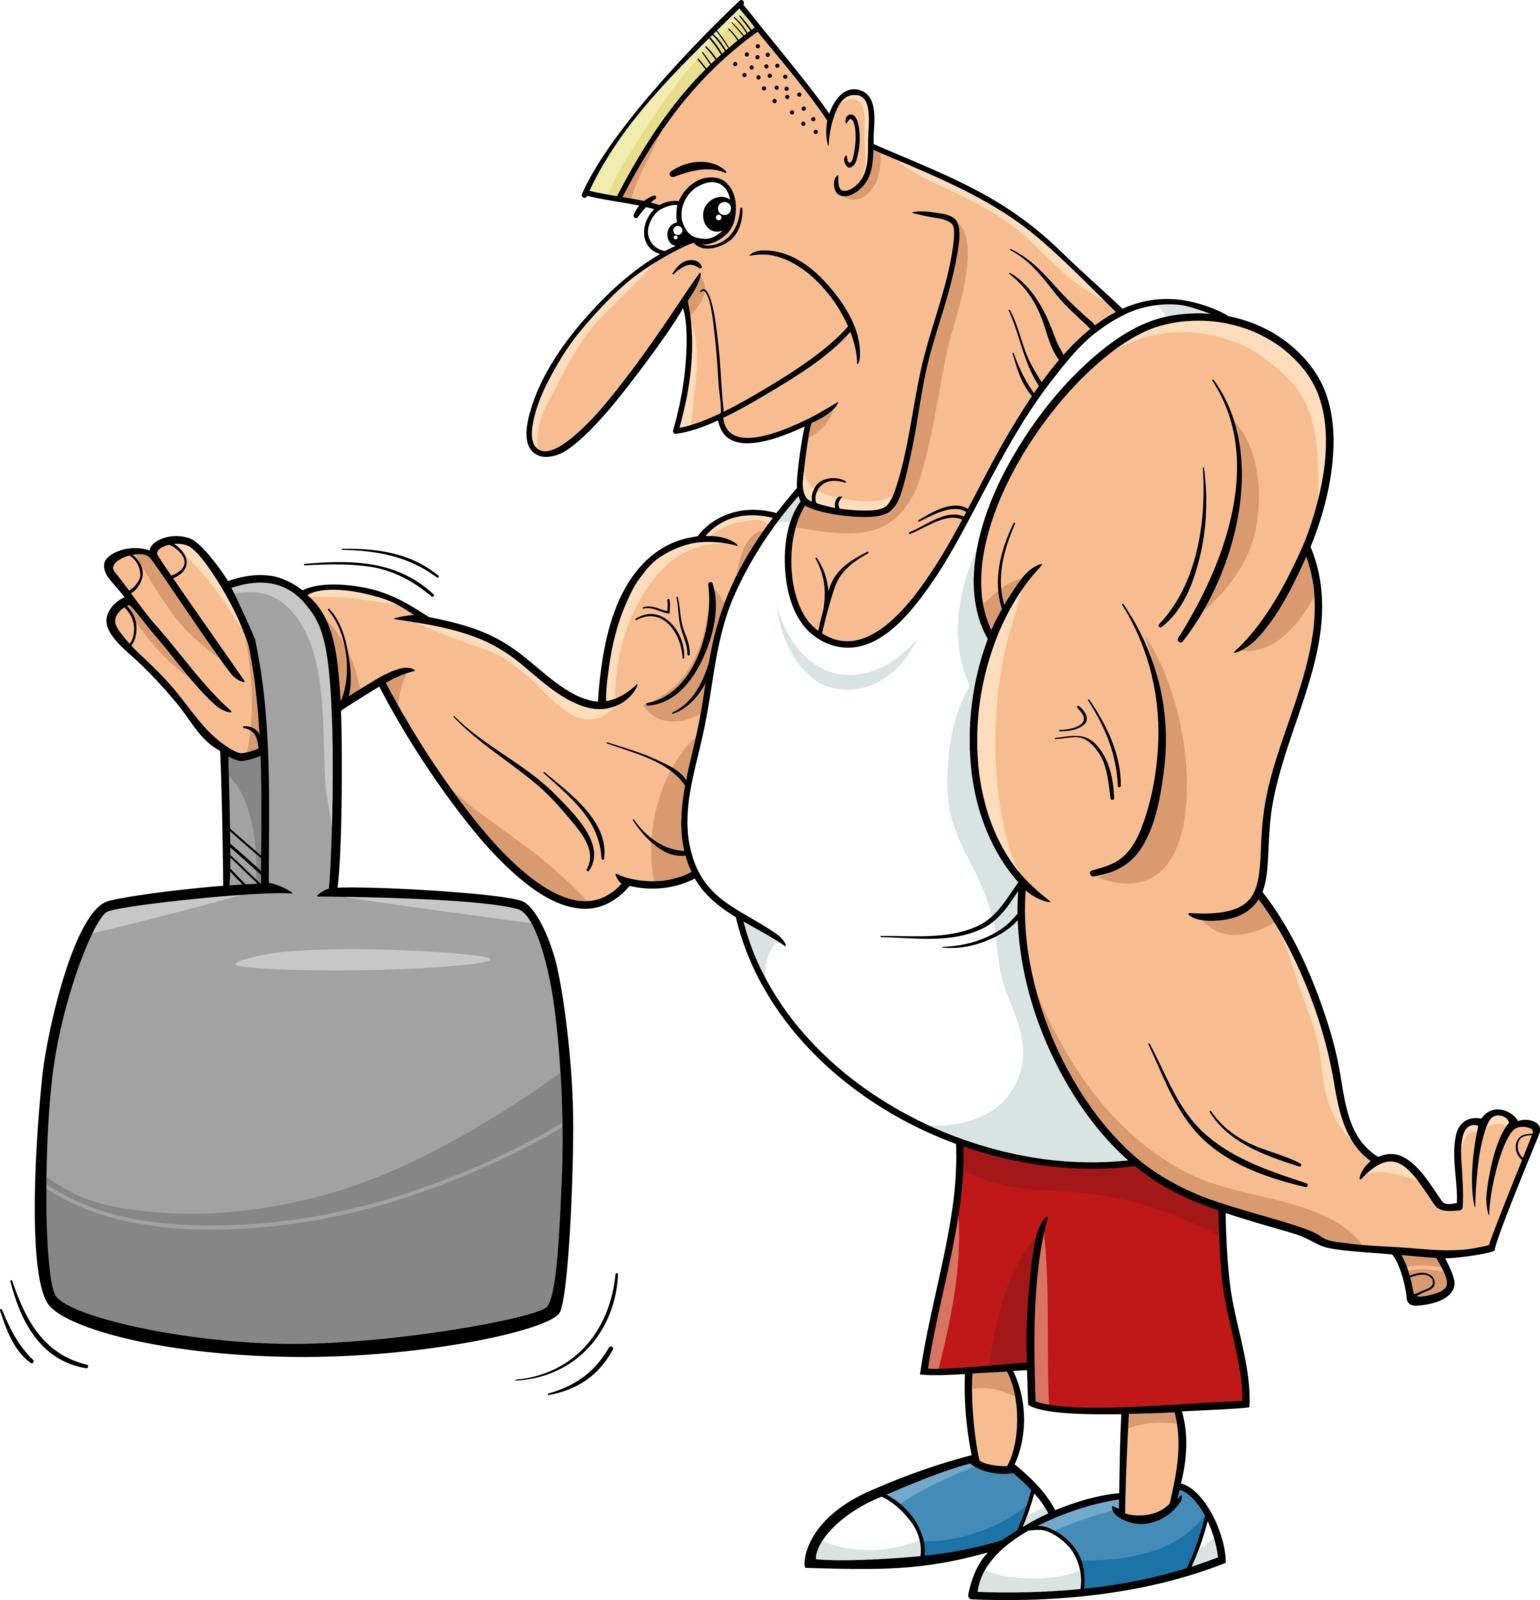 Cartoon Illustrations of Athlete or Strong Man Sportsman with Weight